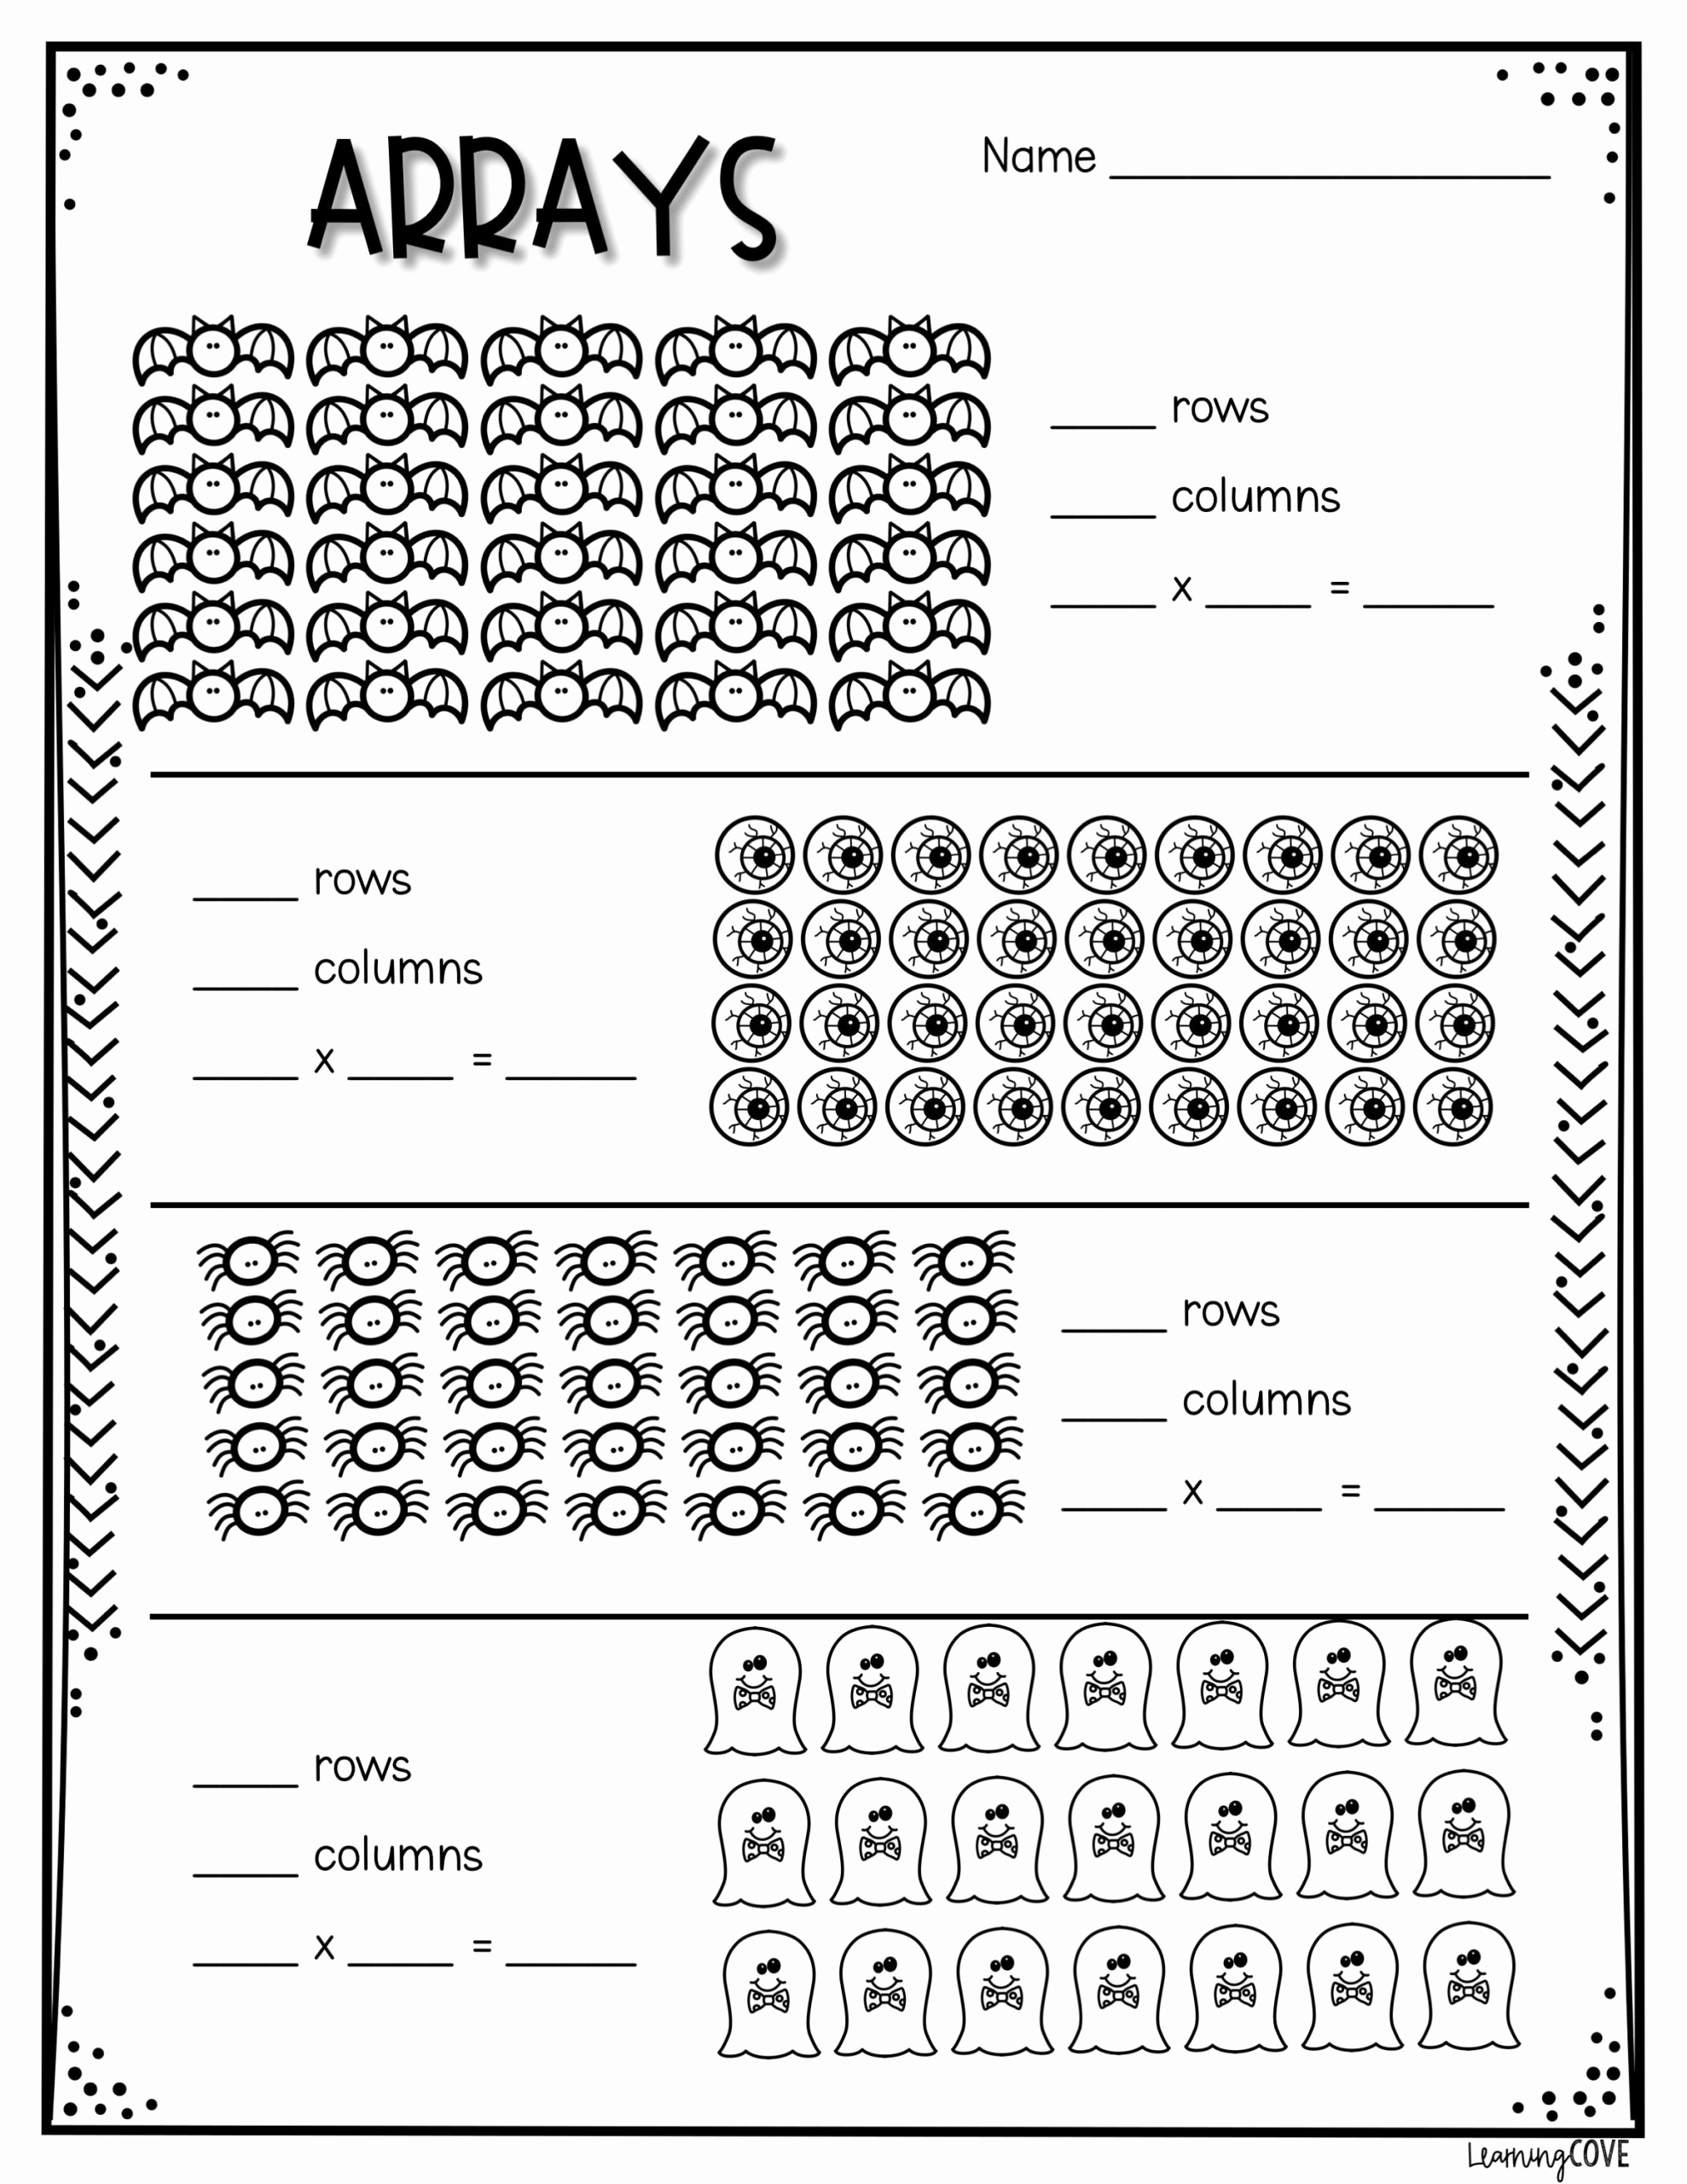 Repeated Addition Worksheets 2nd Grade Awesome 20 Repeated Addition Worksheets 2nd Grade